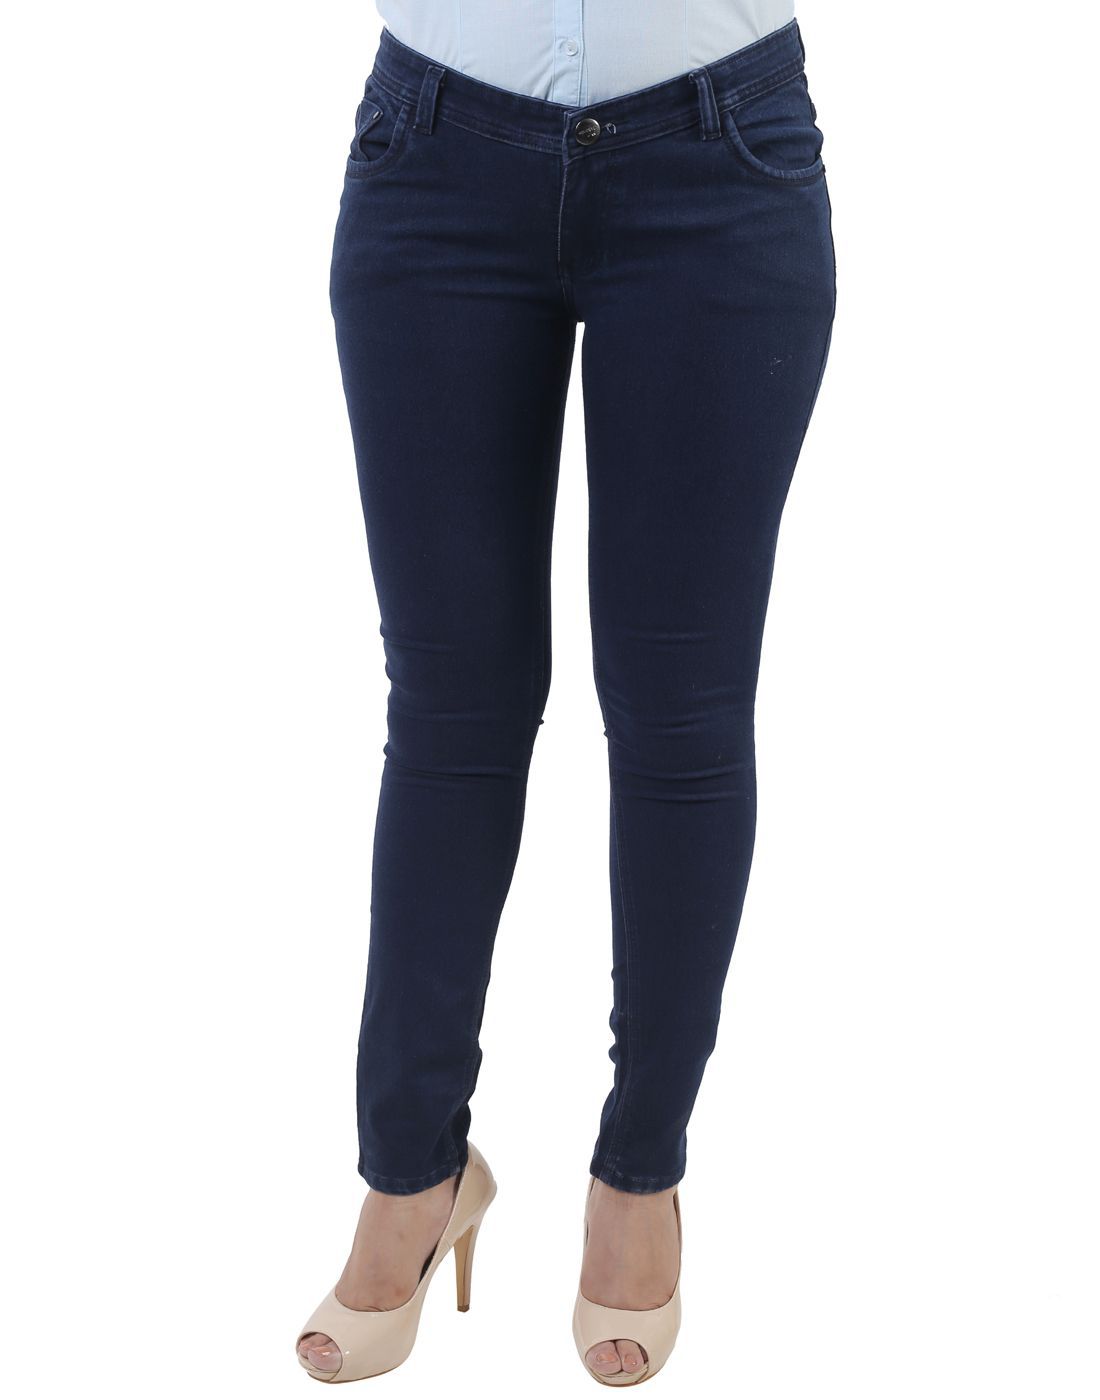 Buy Lee zone Denim Jeans - Blue Online at Best Prices in India - Snapdeal